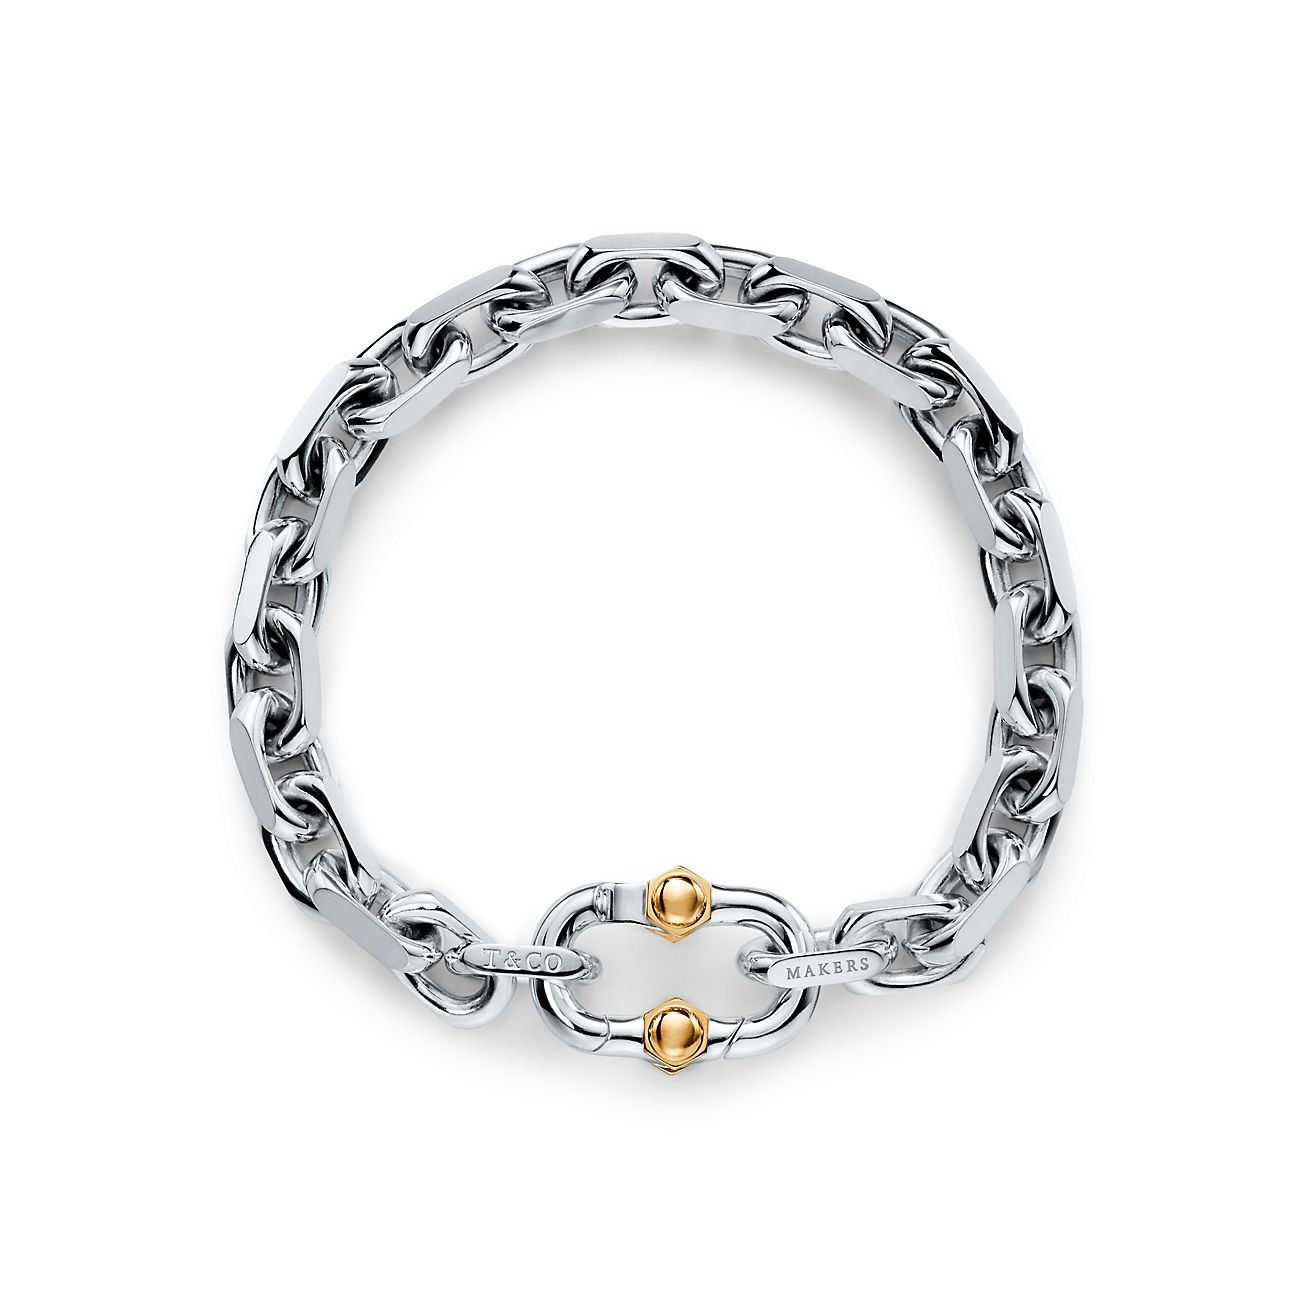 Tiffany 1837™ Makers Wide Chain Bracelet in Sterling Silver and 18k Gold